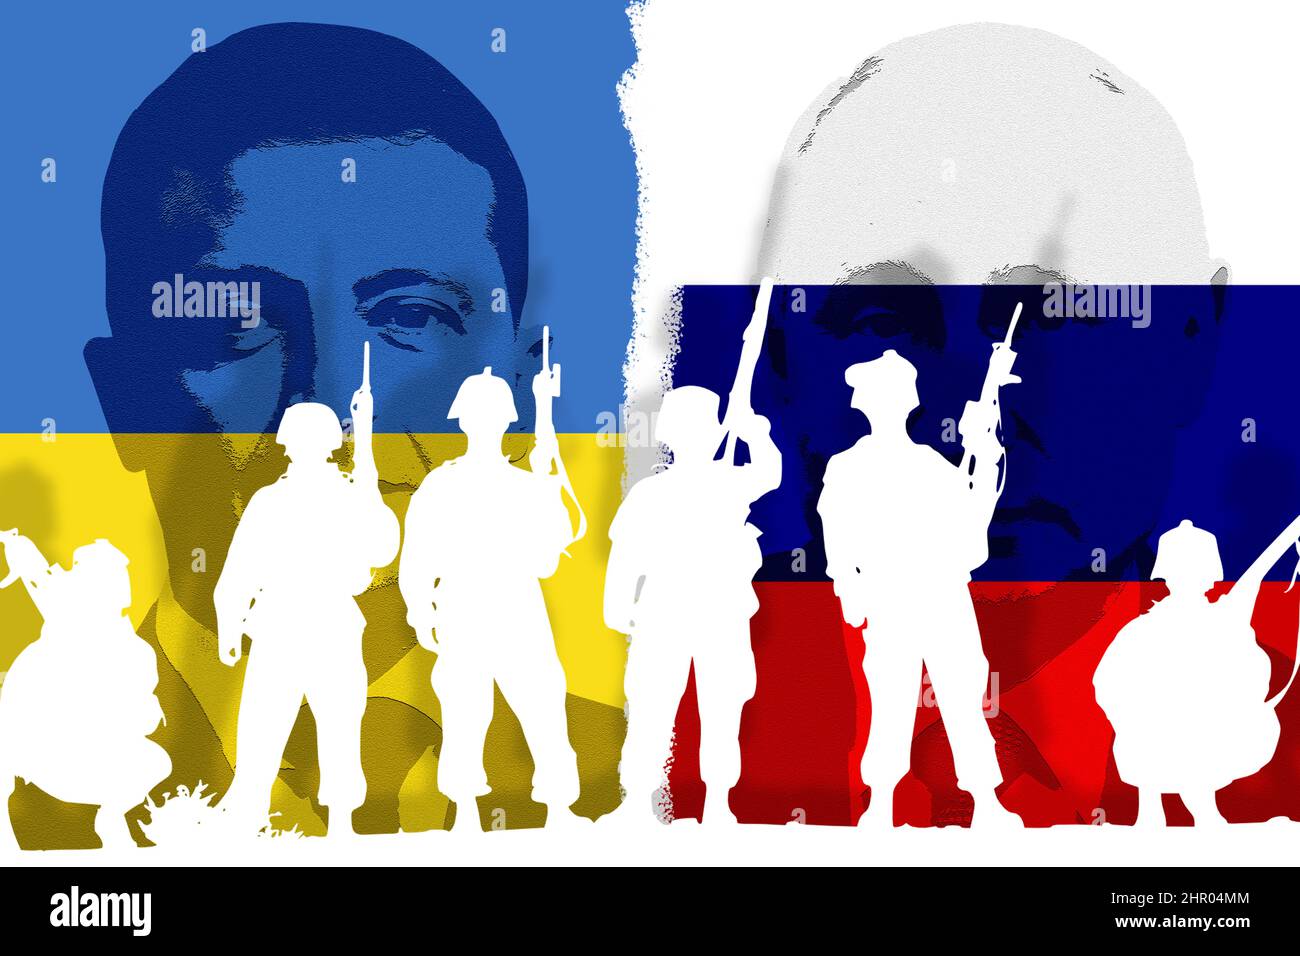 Ukrainian and Russian flags, faces of presidents Volodymyr Zelensky and Vladimir Putin and silhouettes of soldiers Stock Photo